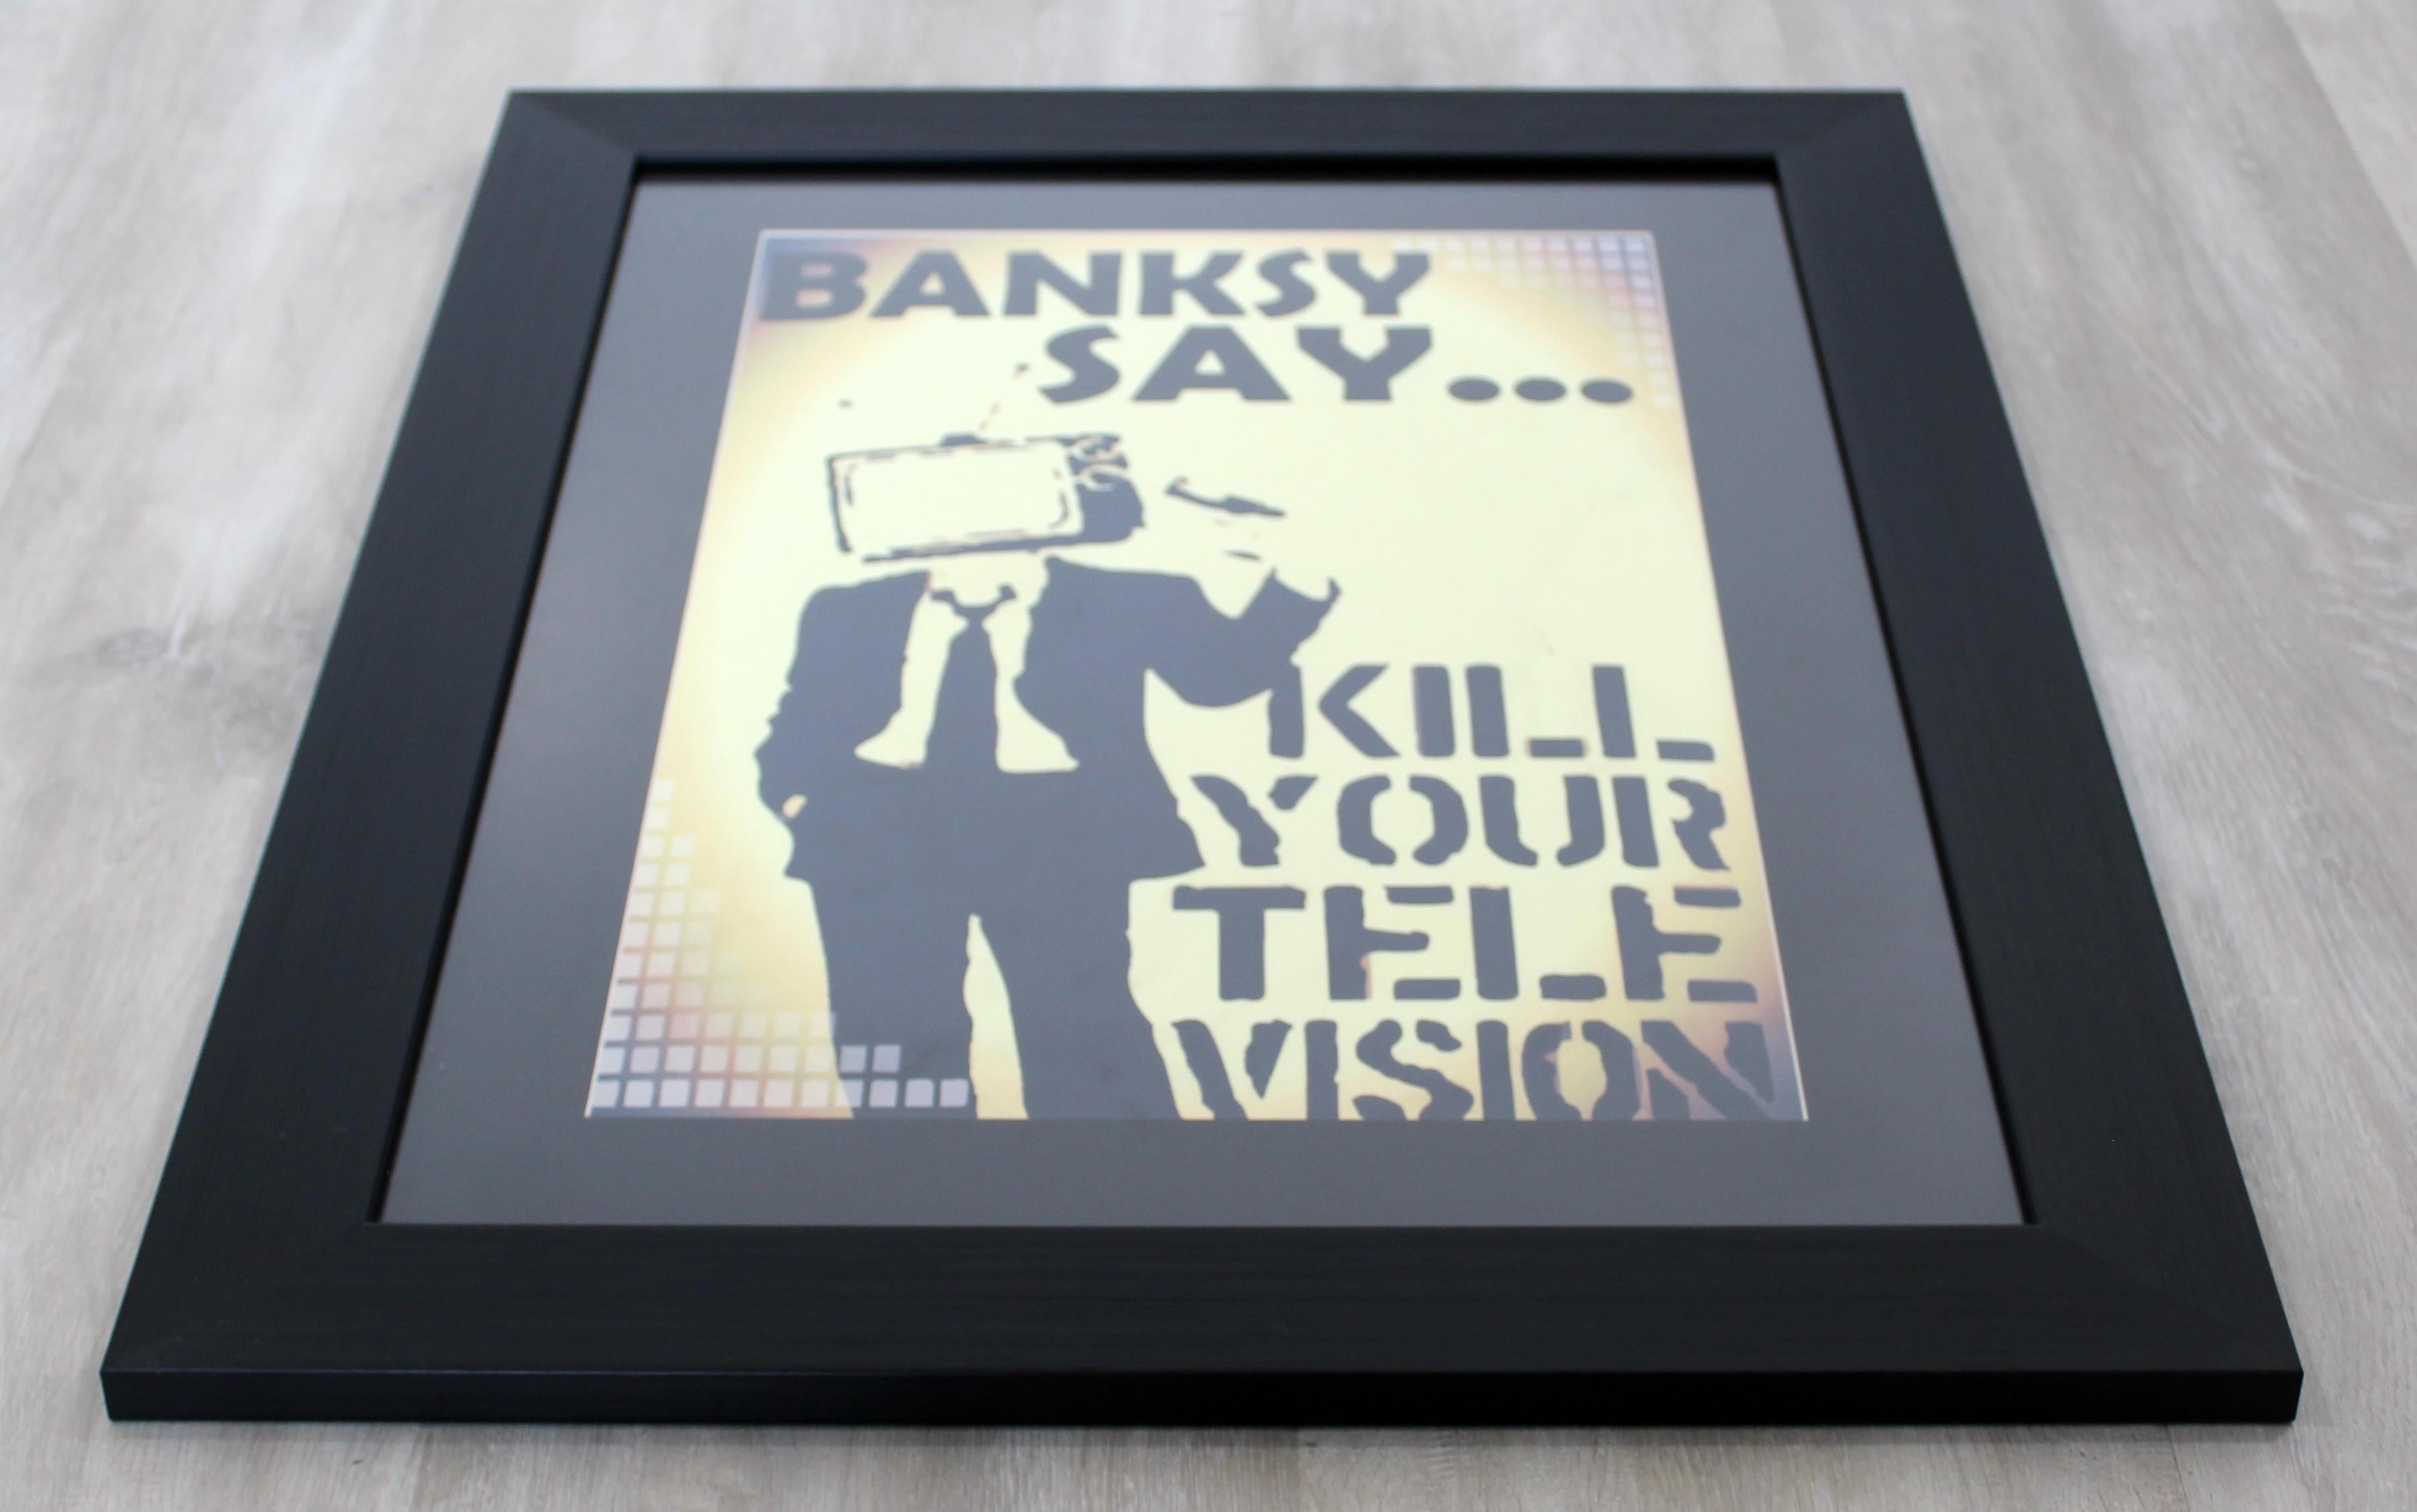 For your consideration is a framed offset lithograph of Bansky's 